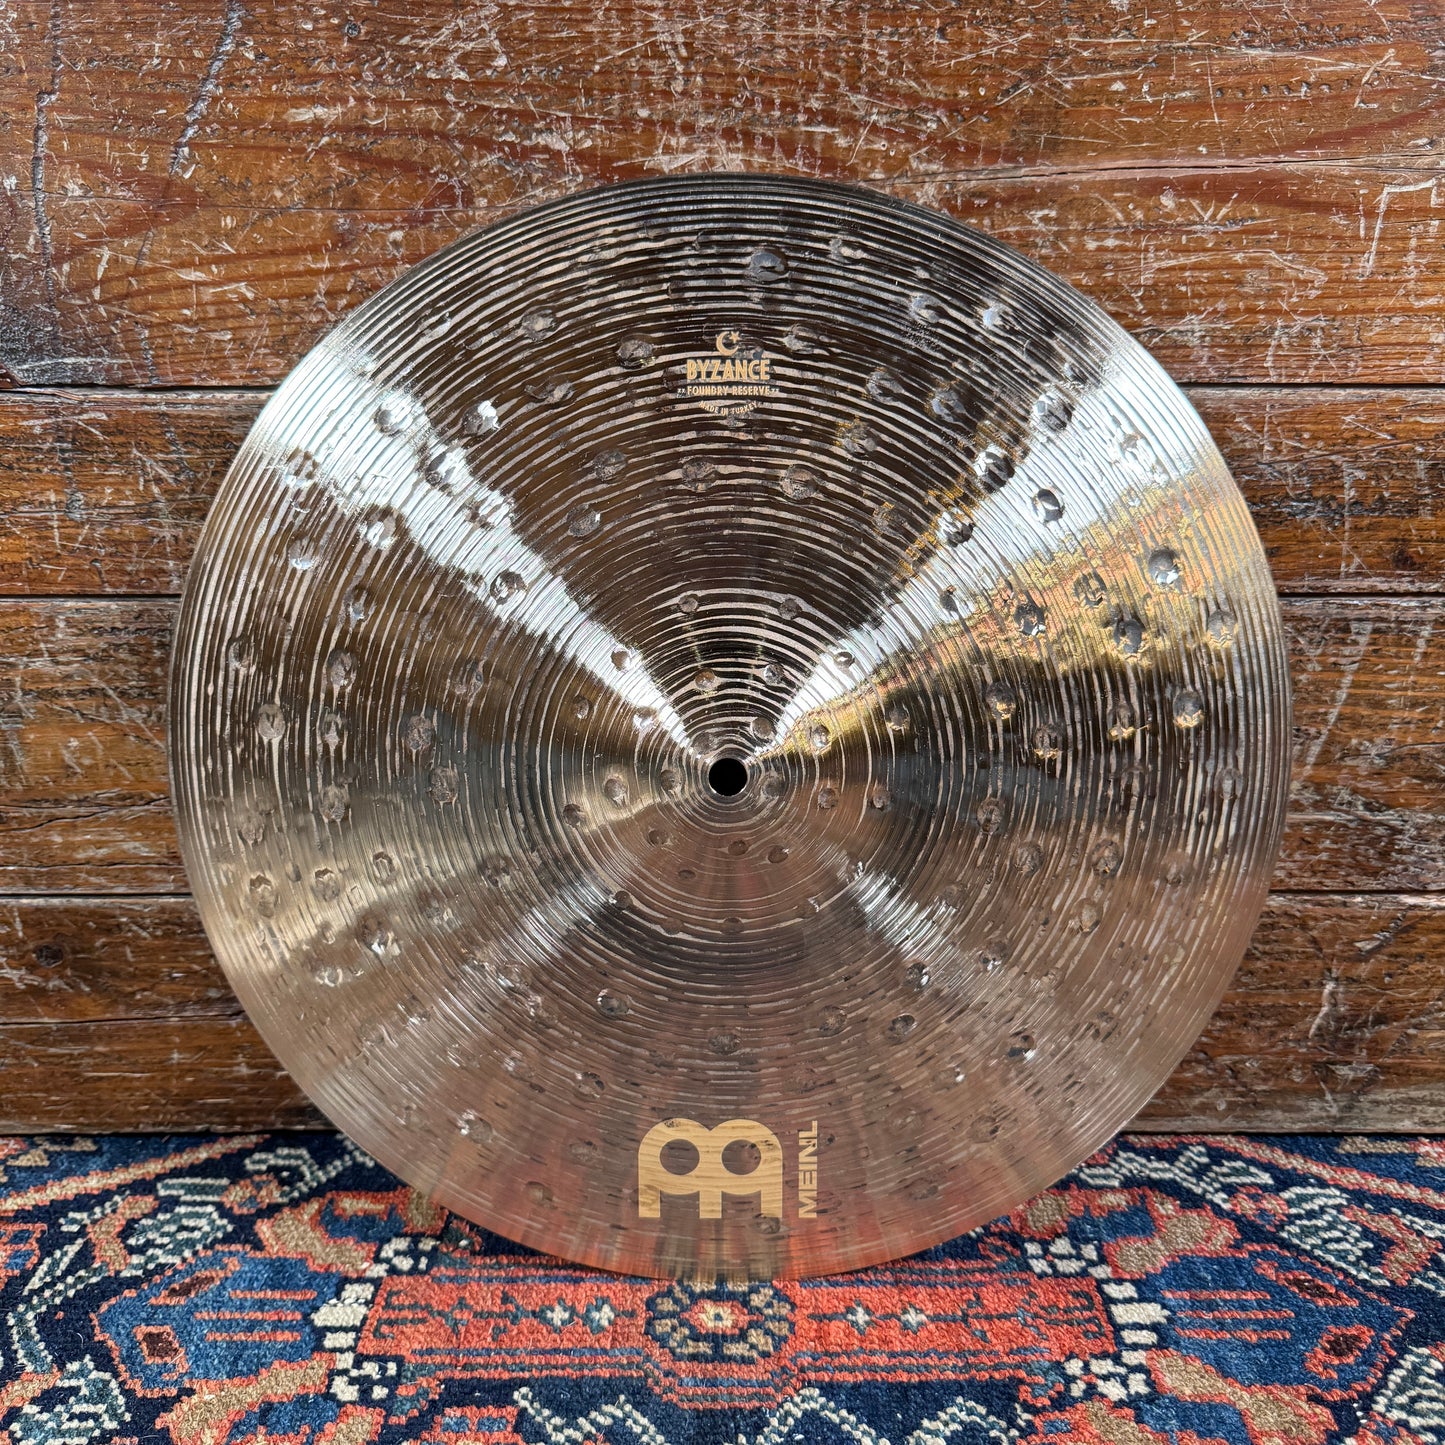 15" Meinl Byzance Foundry Reserve Hi-Hat Cymbal Pair 950g/1305g *Video Demo*